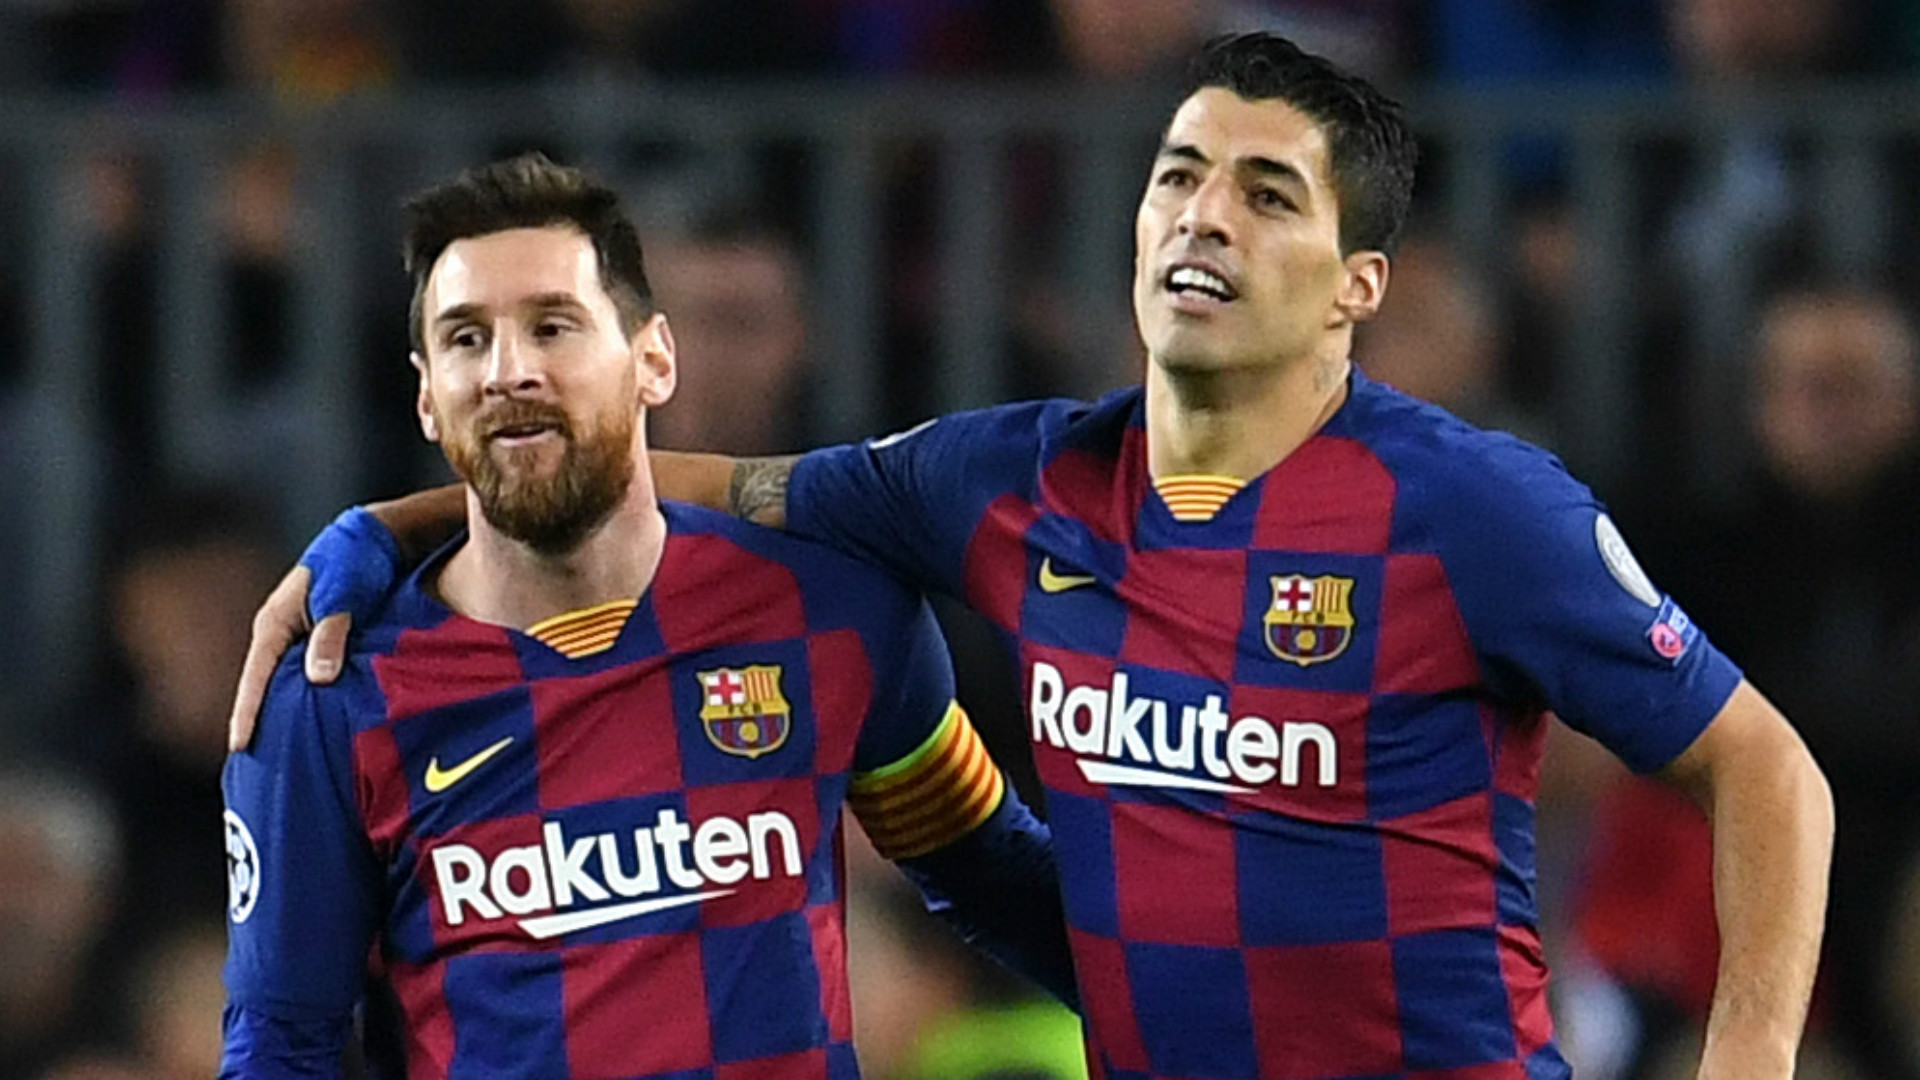 'I felt Messi's pain' - Suarez opens up on disappointing Barcelona exit